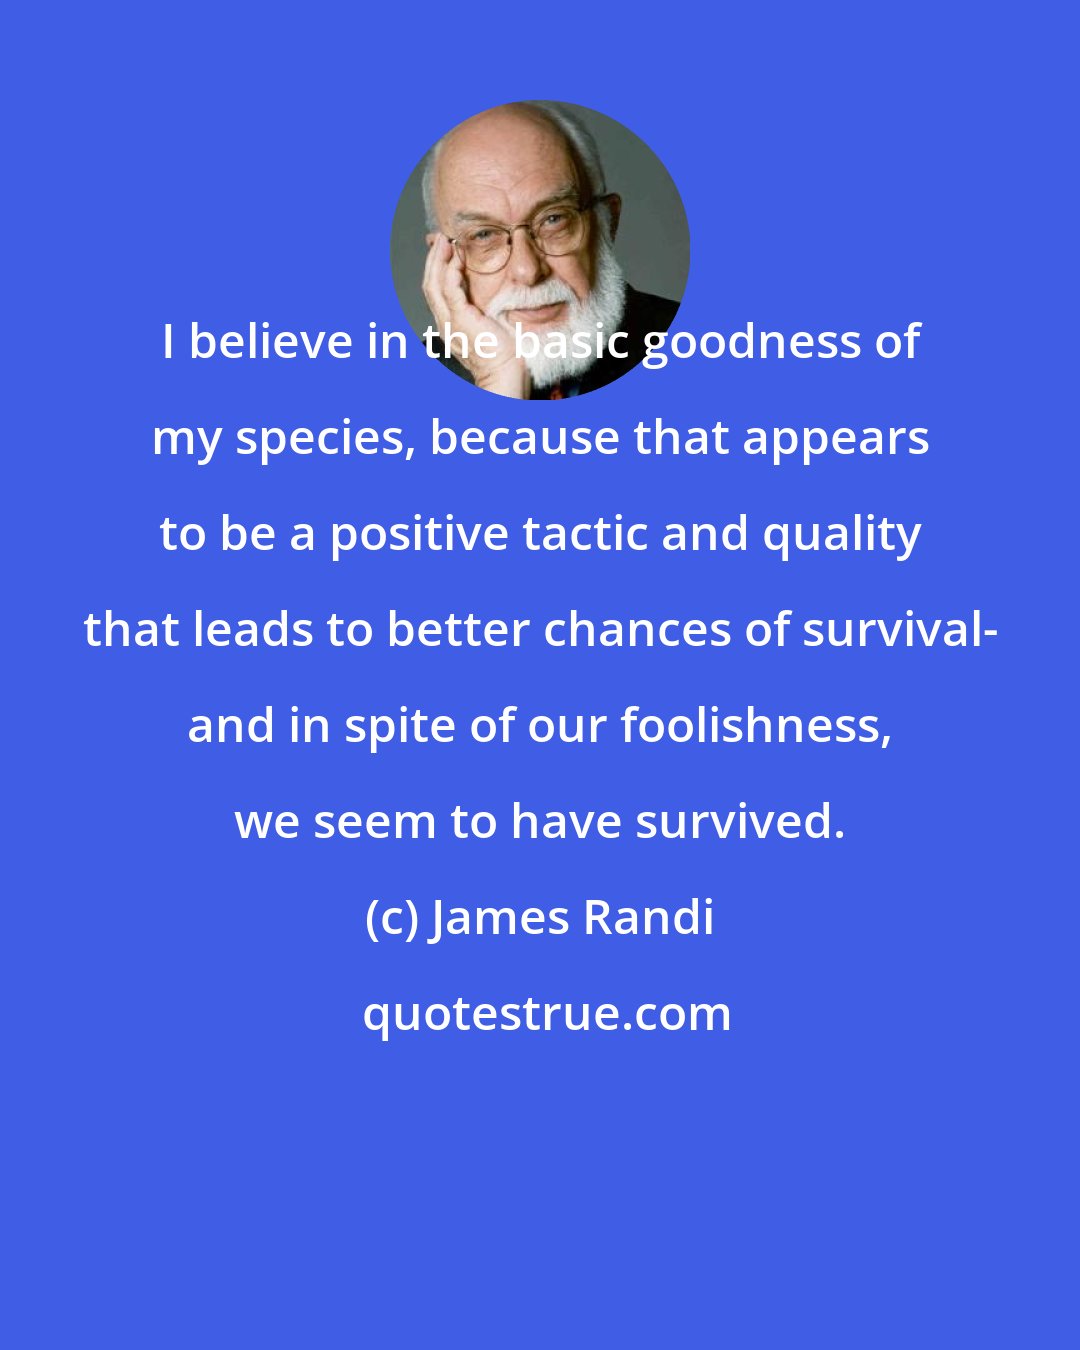 James Randi: I believe in the basic goodness of my species, because that appears to be a positive tactic and quality that leads to better chances of survival- and in spite of our foolishness, we seem to have survived.